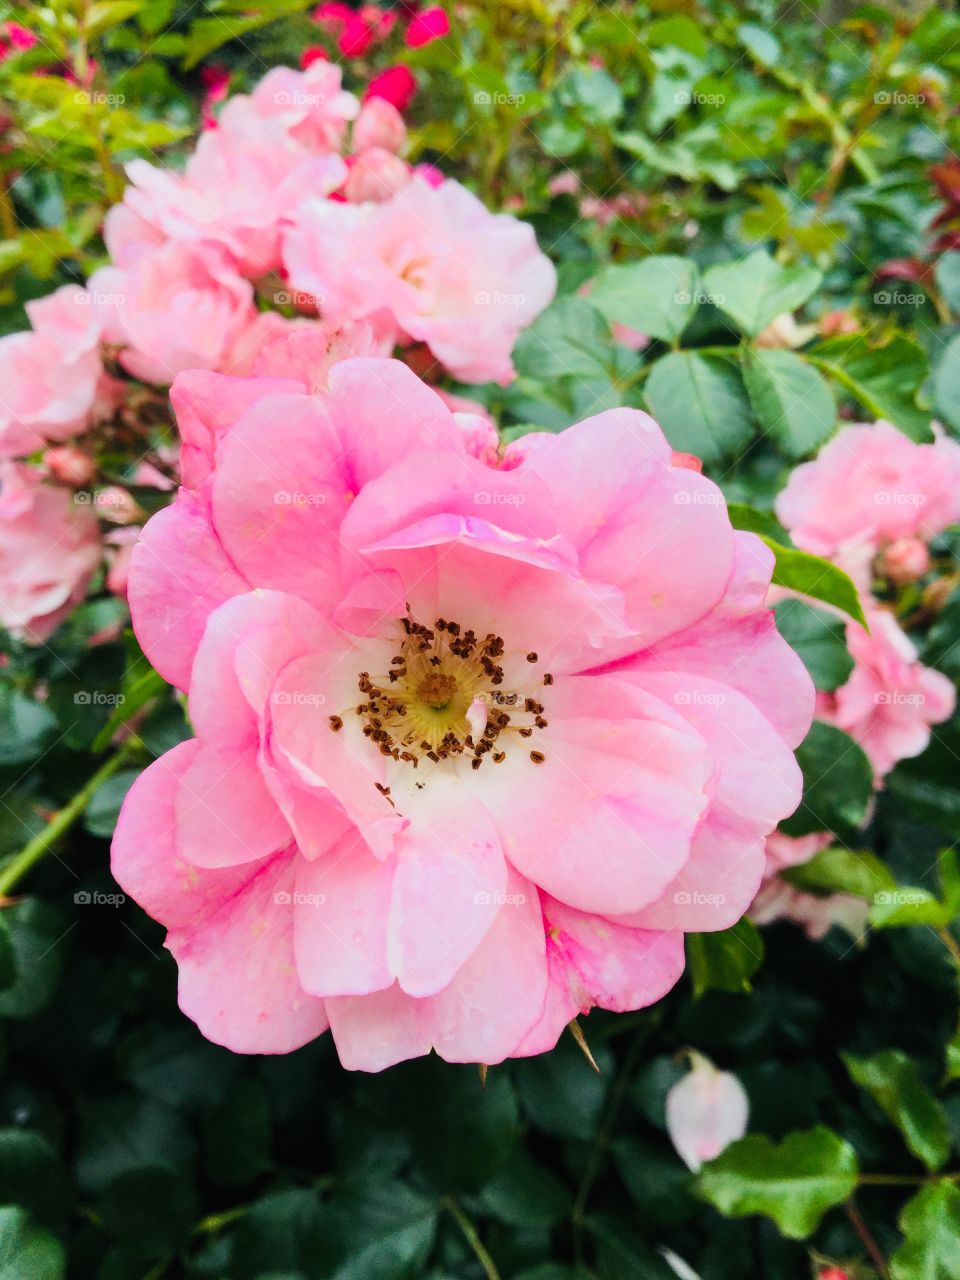 This is a photo of a pretty light pink rose, with more roses in the background. There are very green leaves in the background.